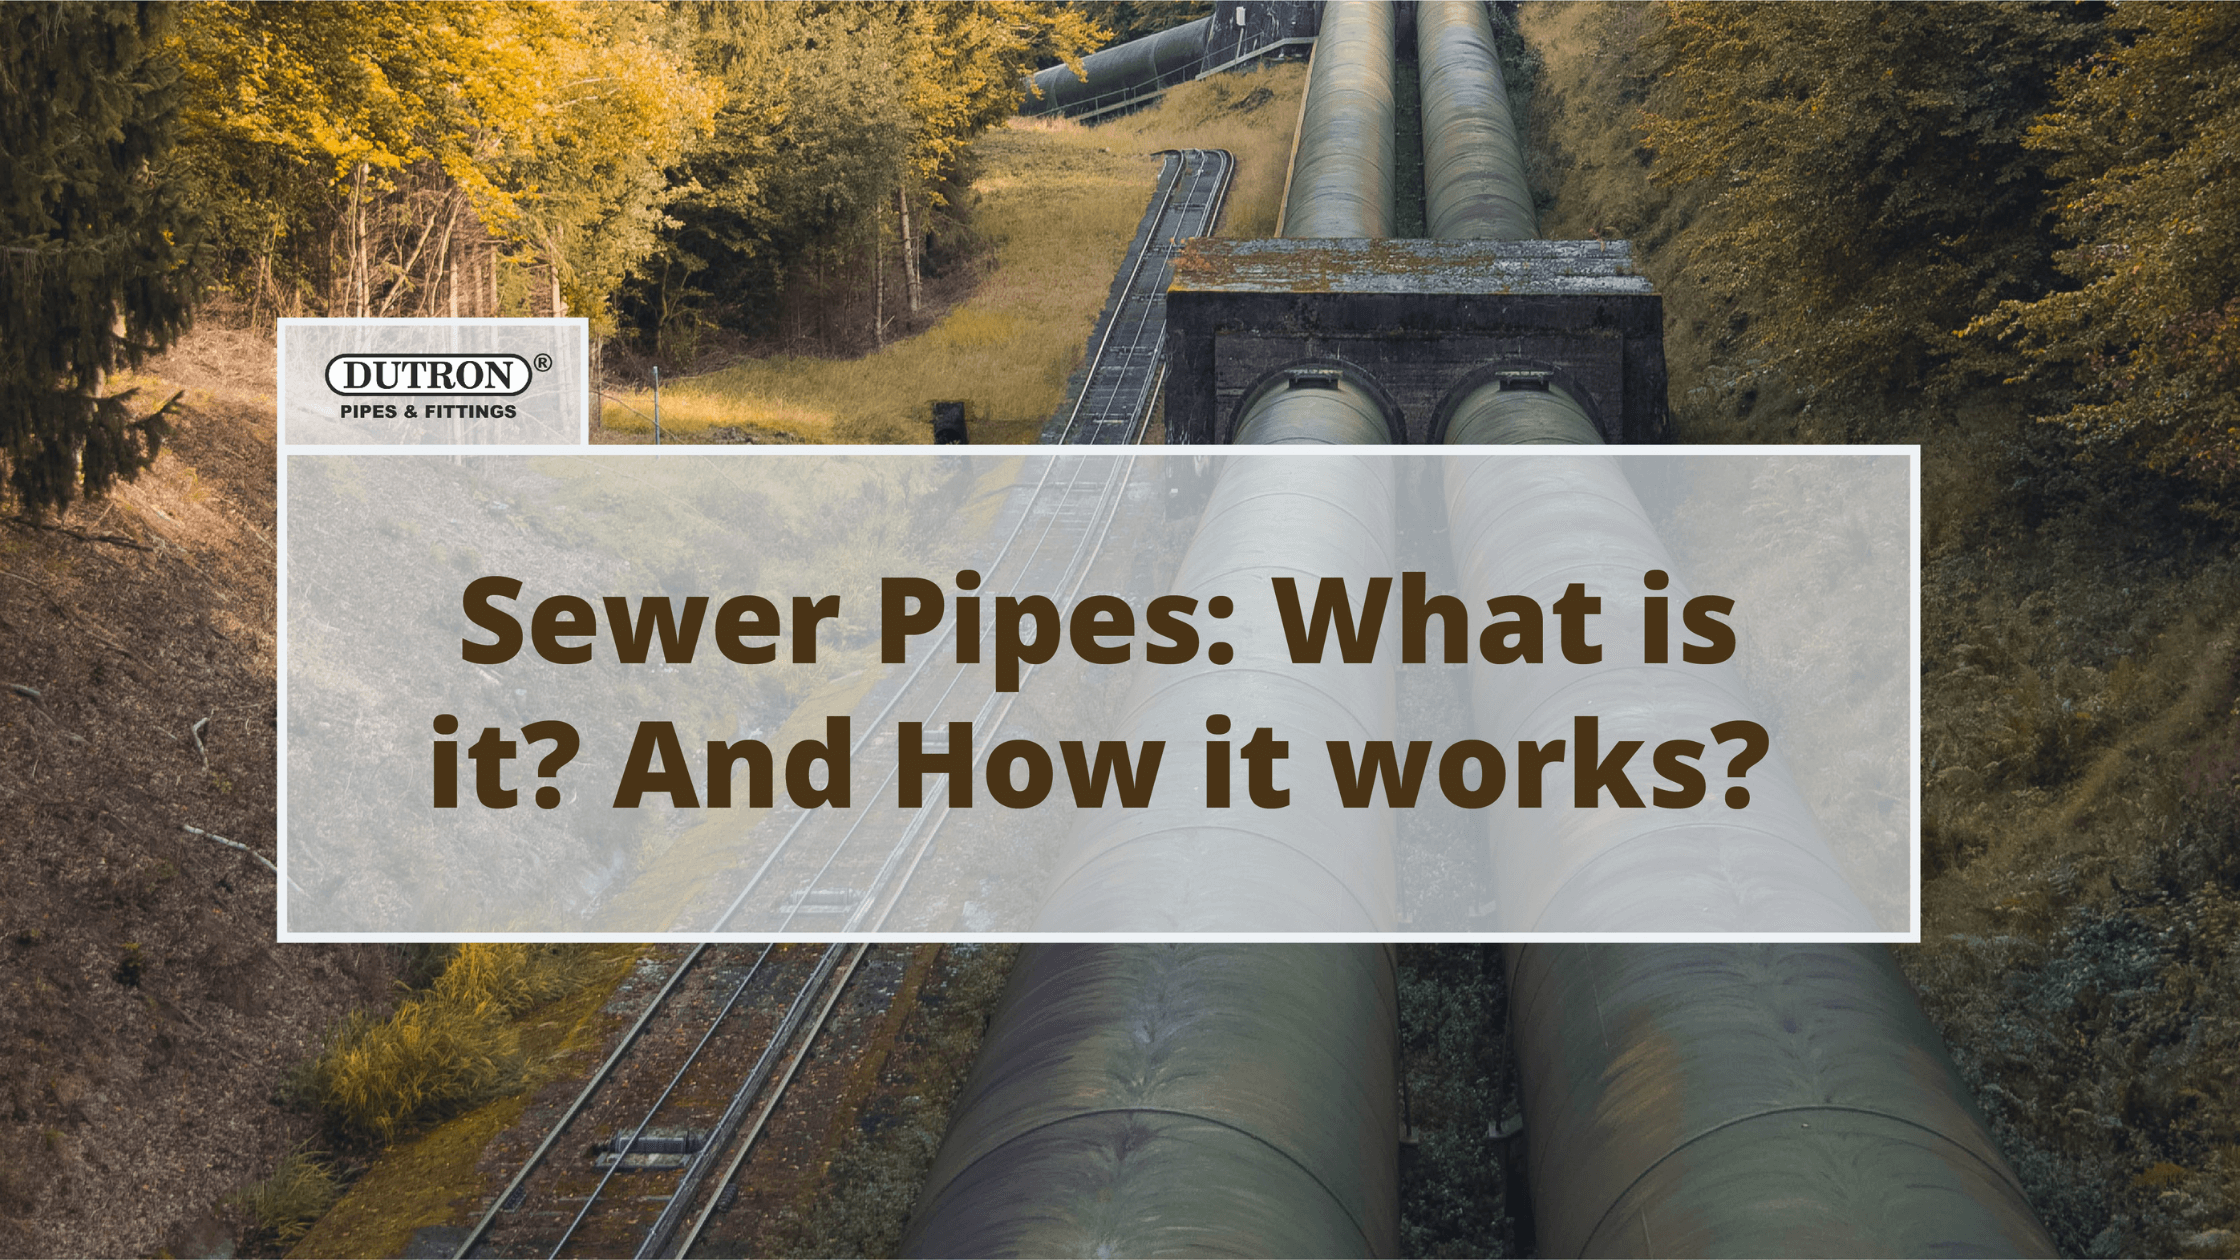 Sewer Pipes: What it is? And, How it Works?